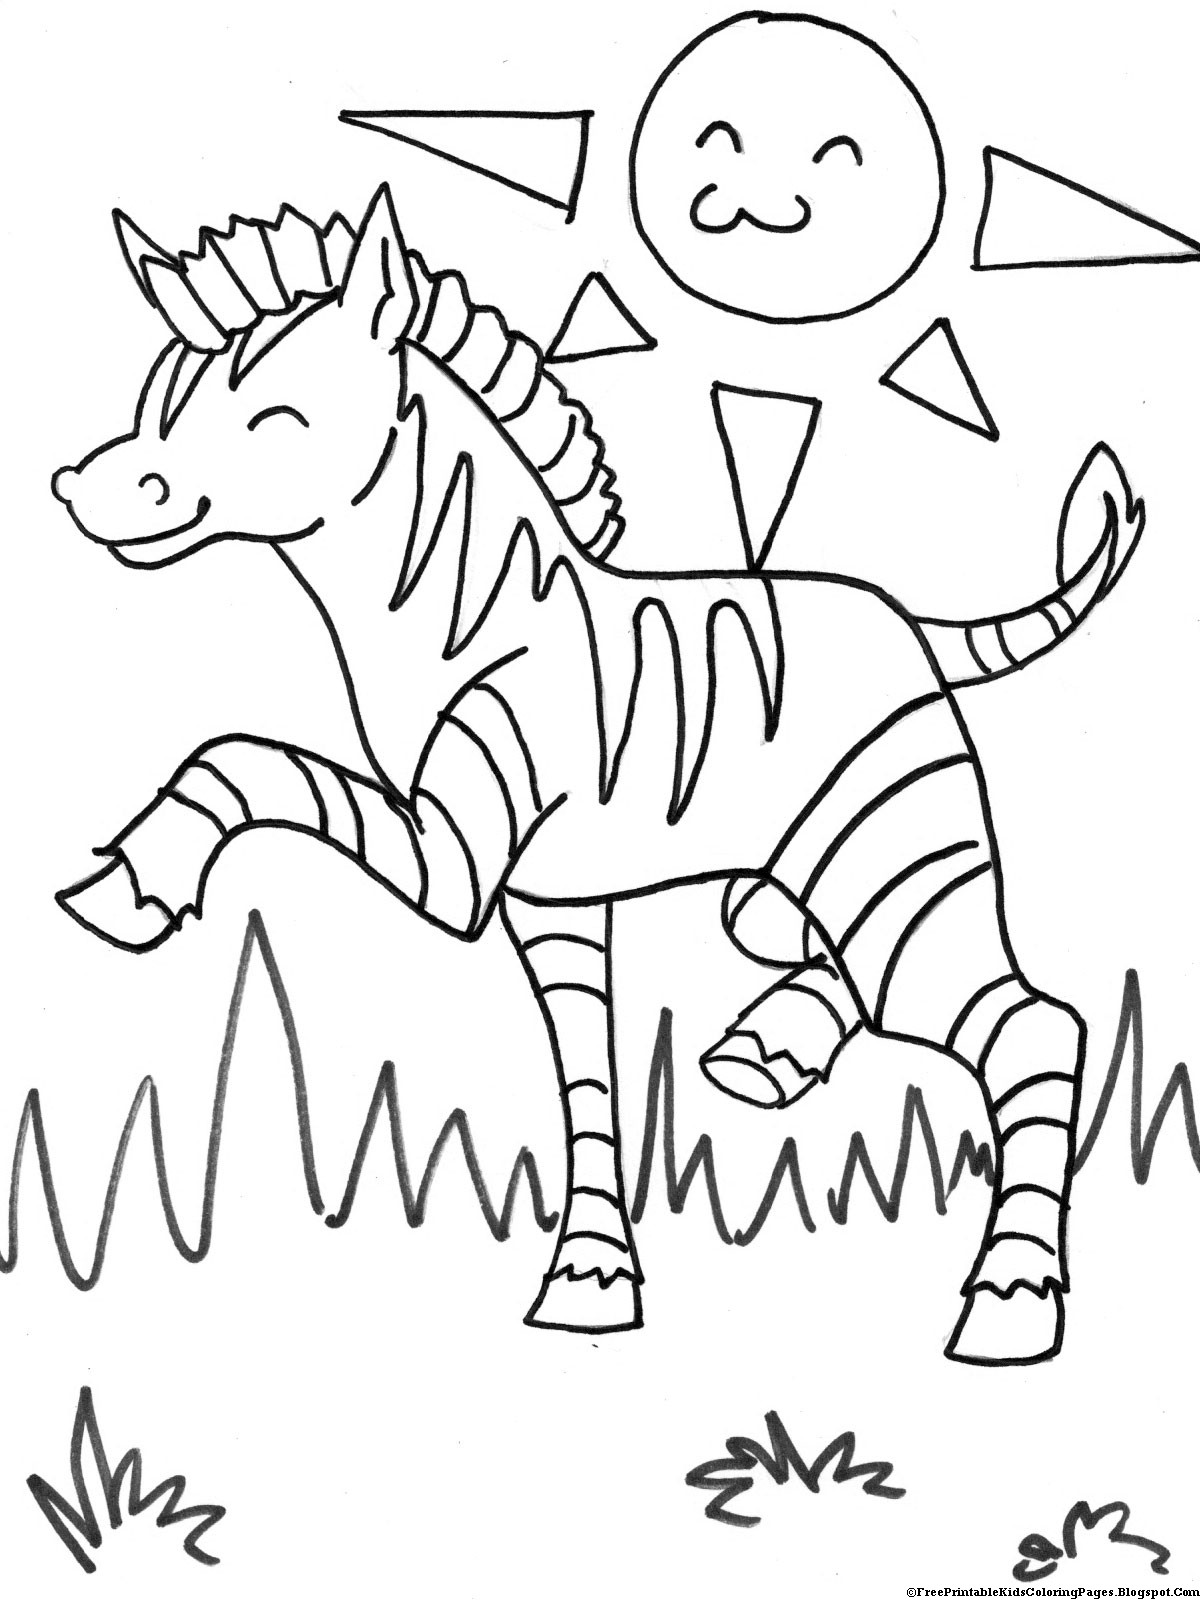 Printable Coloring Pages For Kids Animals
 Zebra Coloring Pages Free Printable Kids Coloring Pages